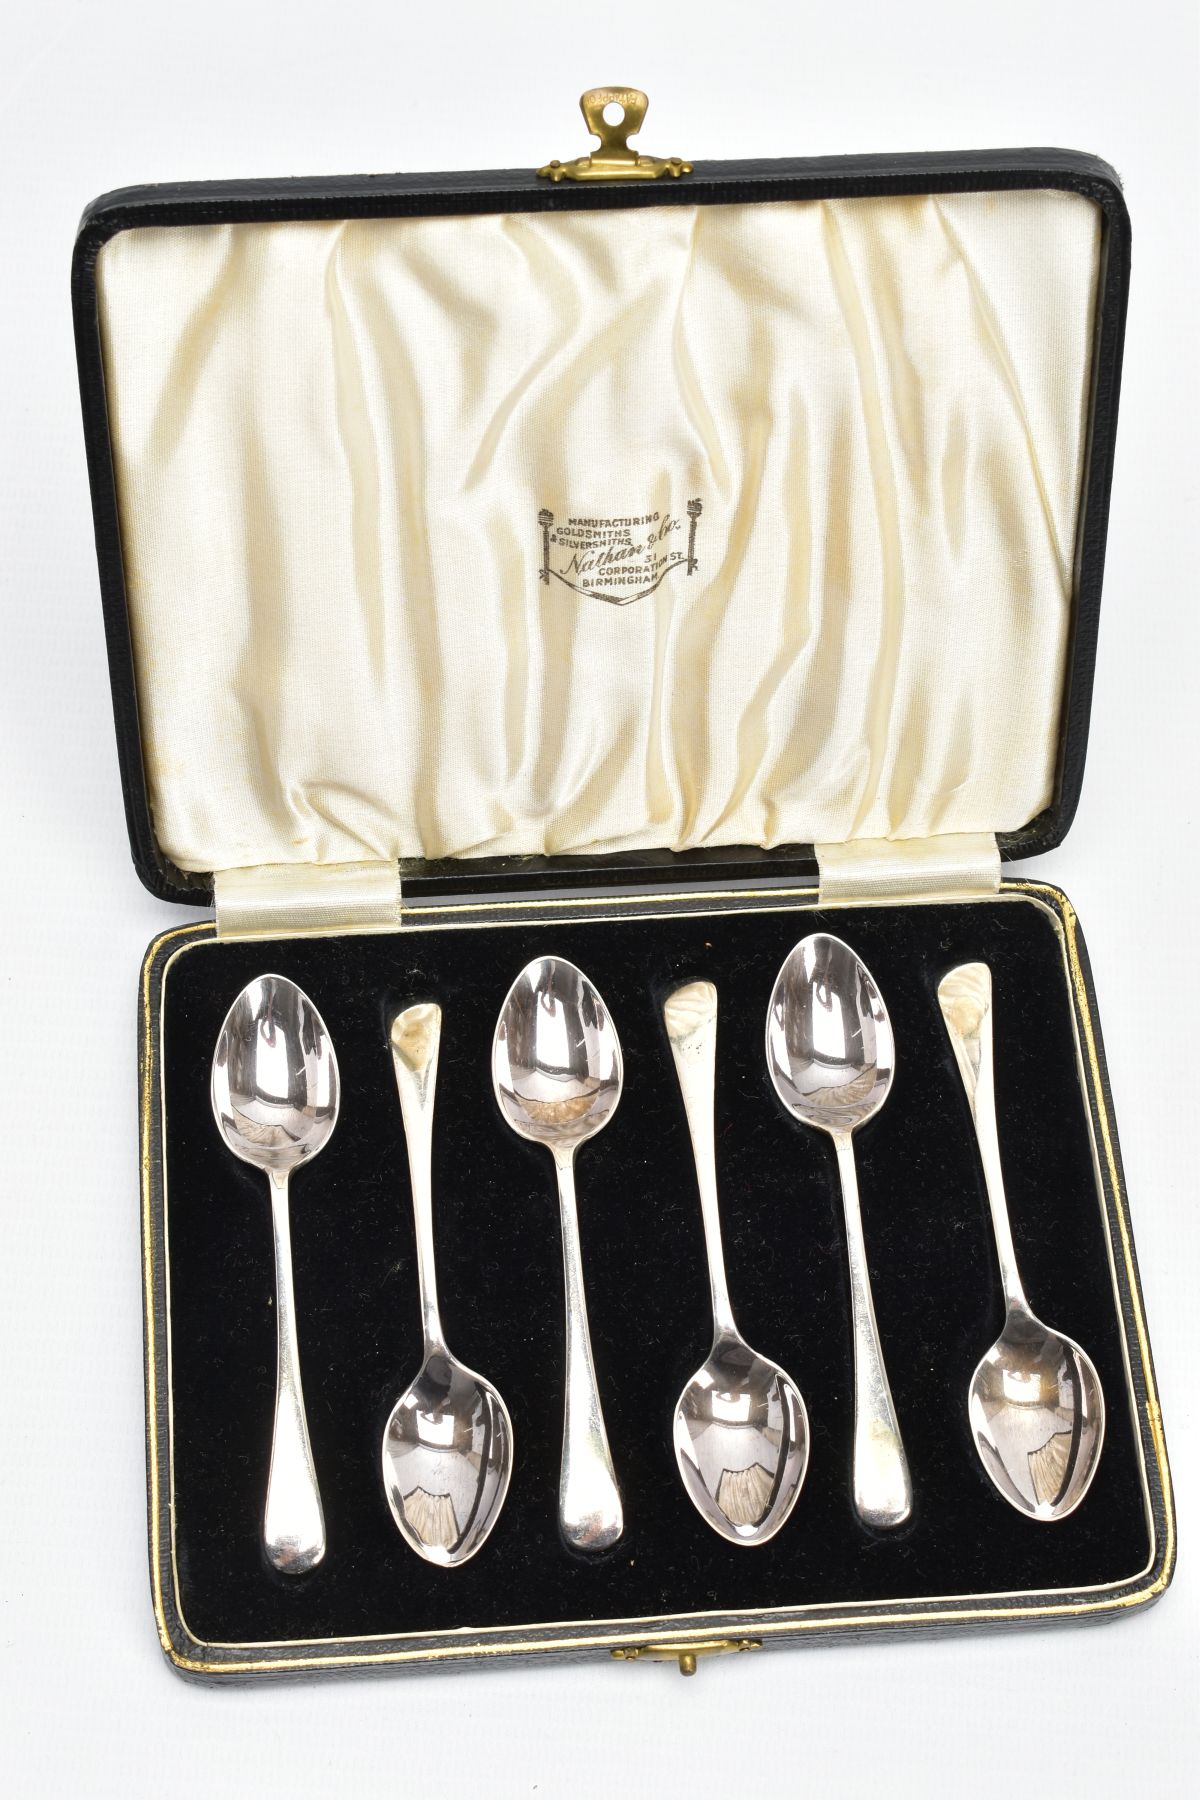 A CASED SET OF SIX SILVER TEASPOONS, each of an old English pattern, hallmarked 'T Wilkinson & Sons'